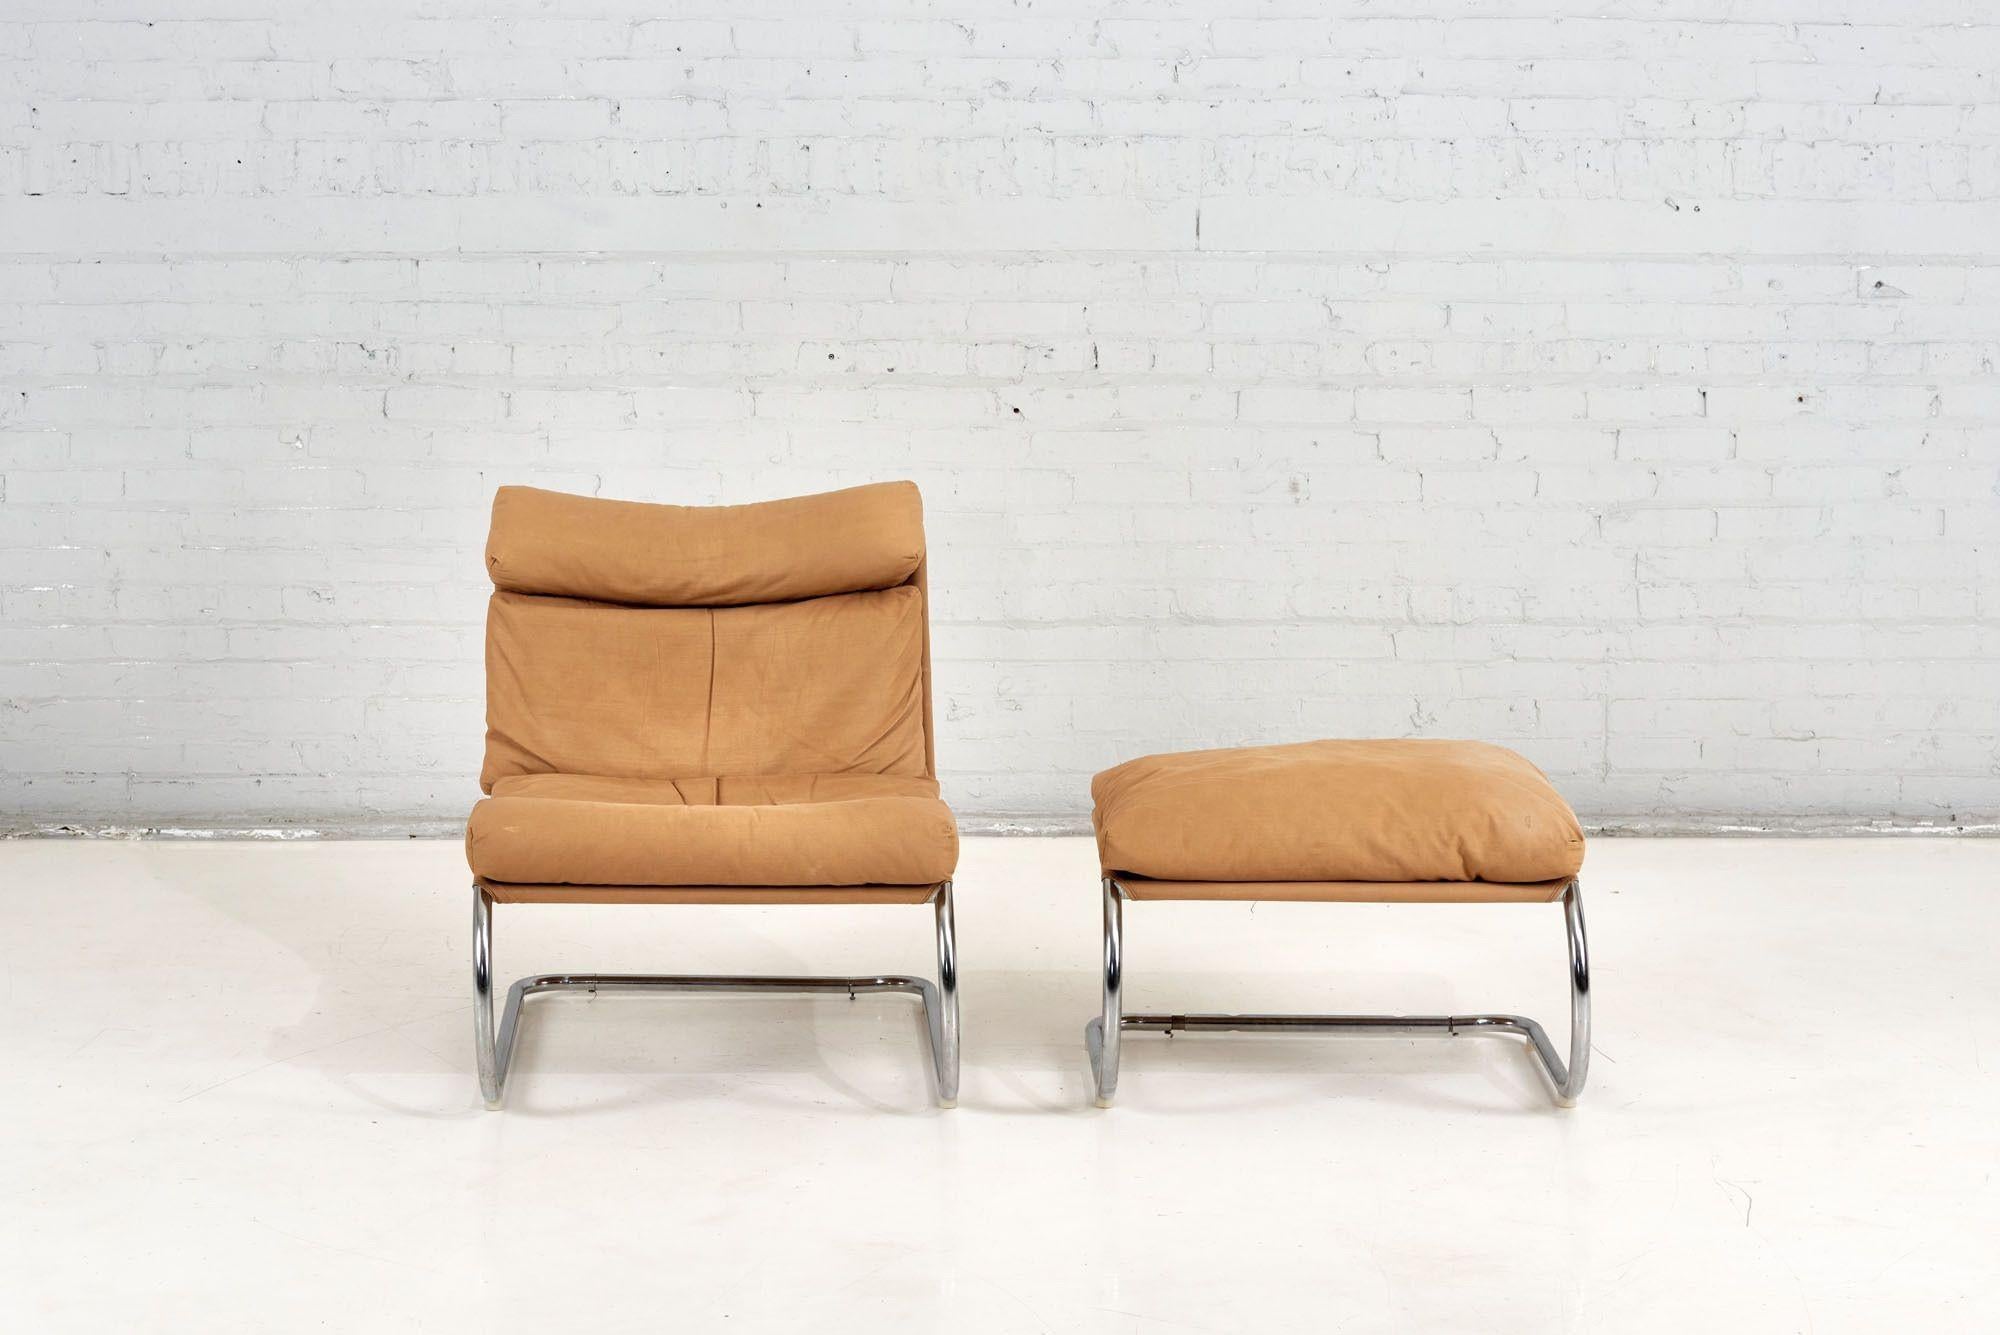 Stainless steel and canvas Cantilever MR lounge chair & ottoman after Mies van der Rohe, 1960. Original.